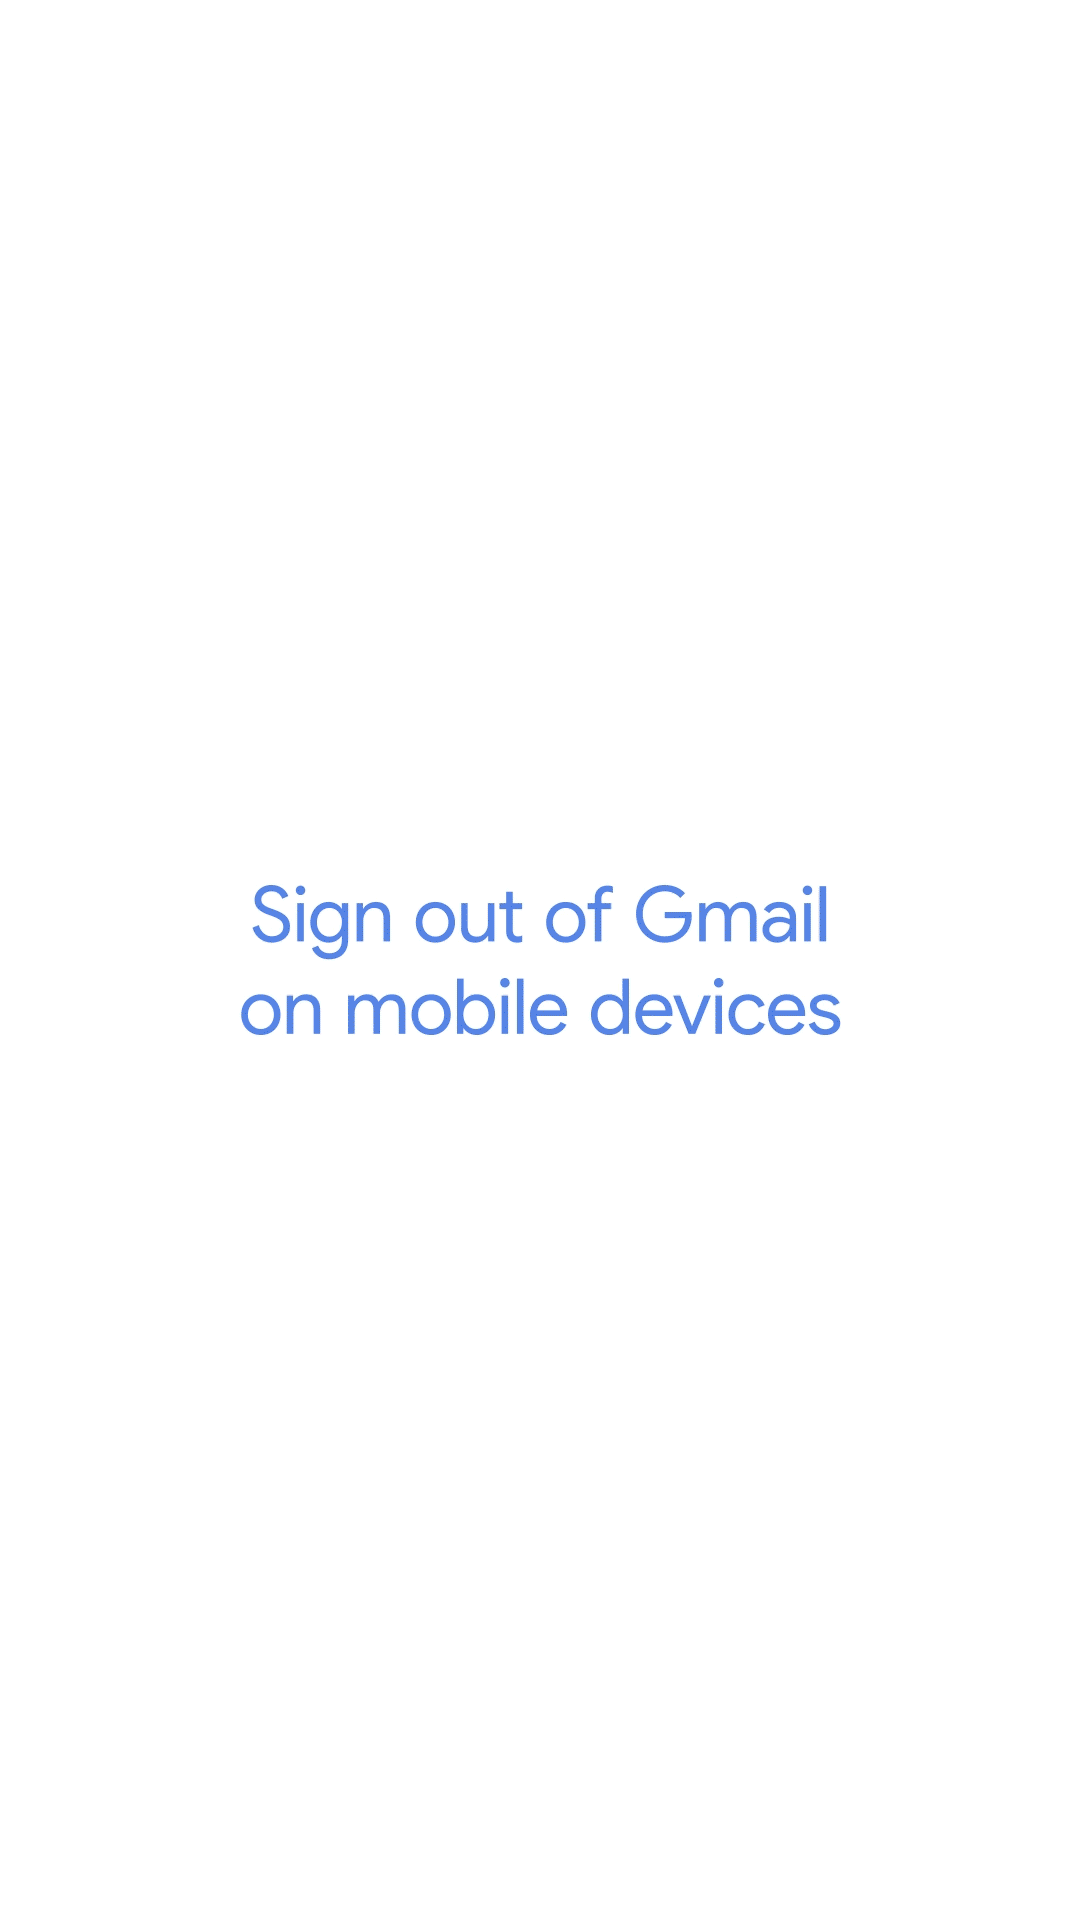 An animation showing how to sign out of Gmail on iOS